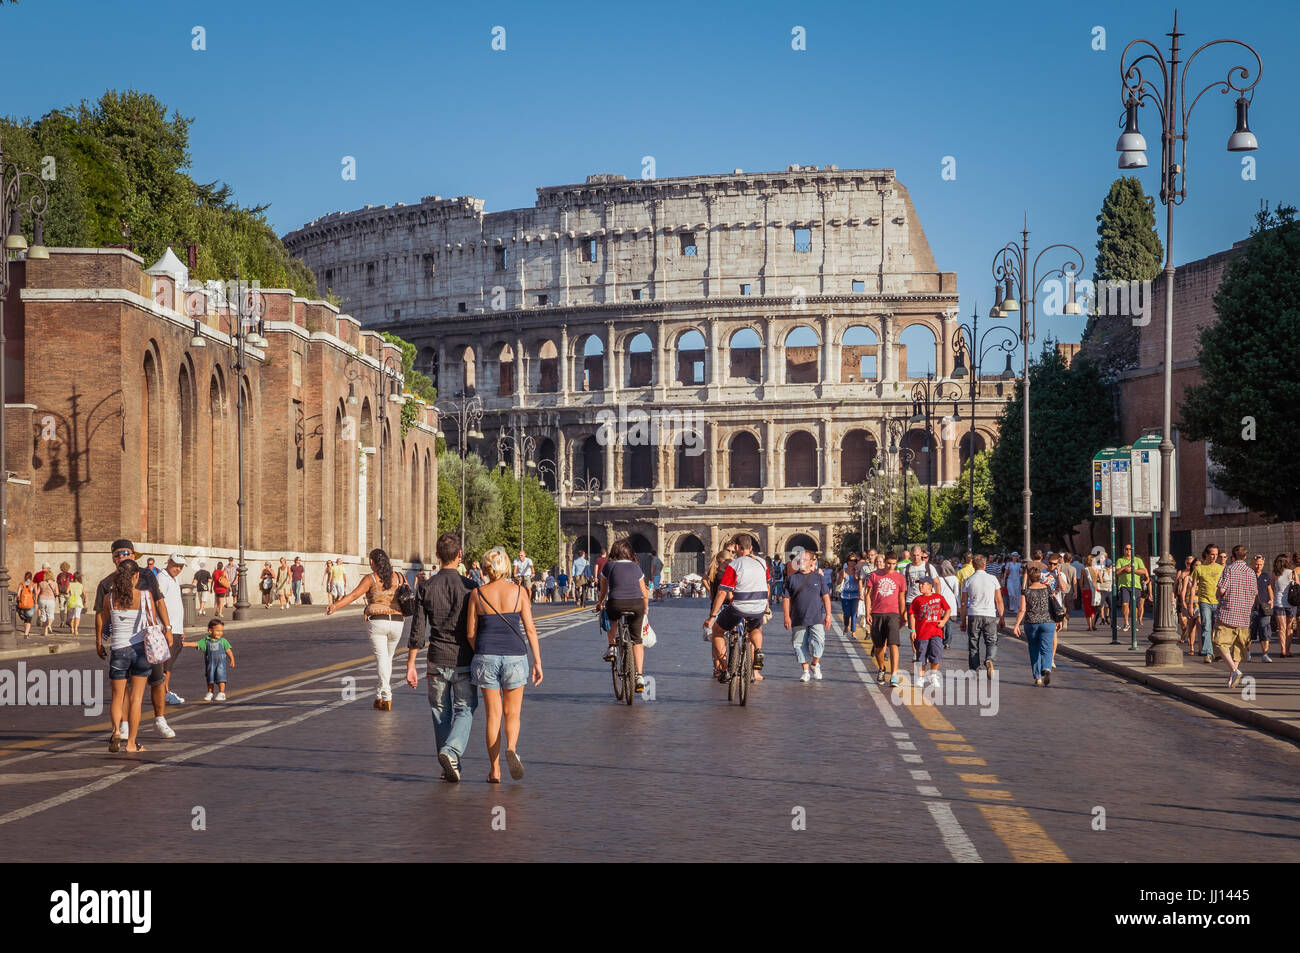 ROME, ITALY - SEPTEMBER 5, 2010: People are walking along the Via dei Fori Imperiali in Rome, enjoying the late afternoon sun. The Colosseum stands ta Stock Photo